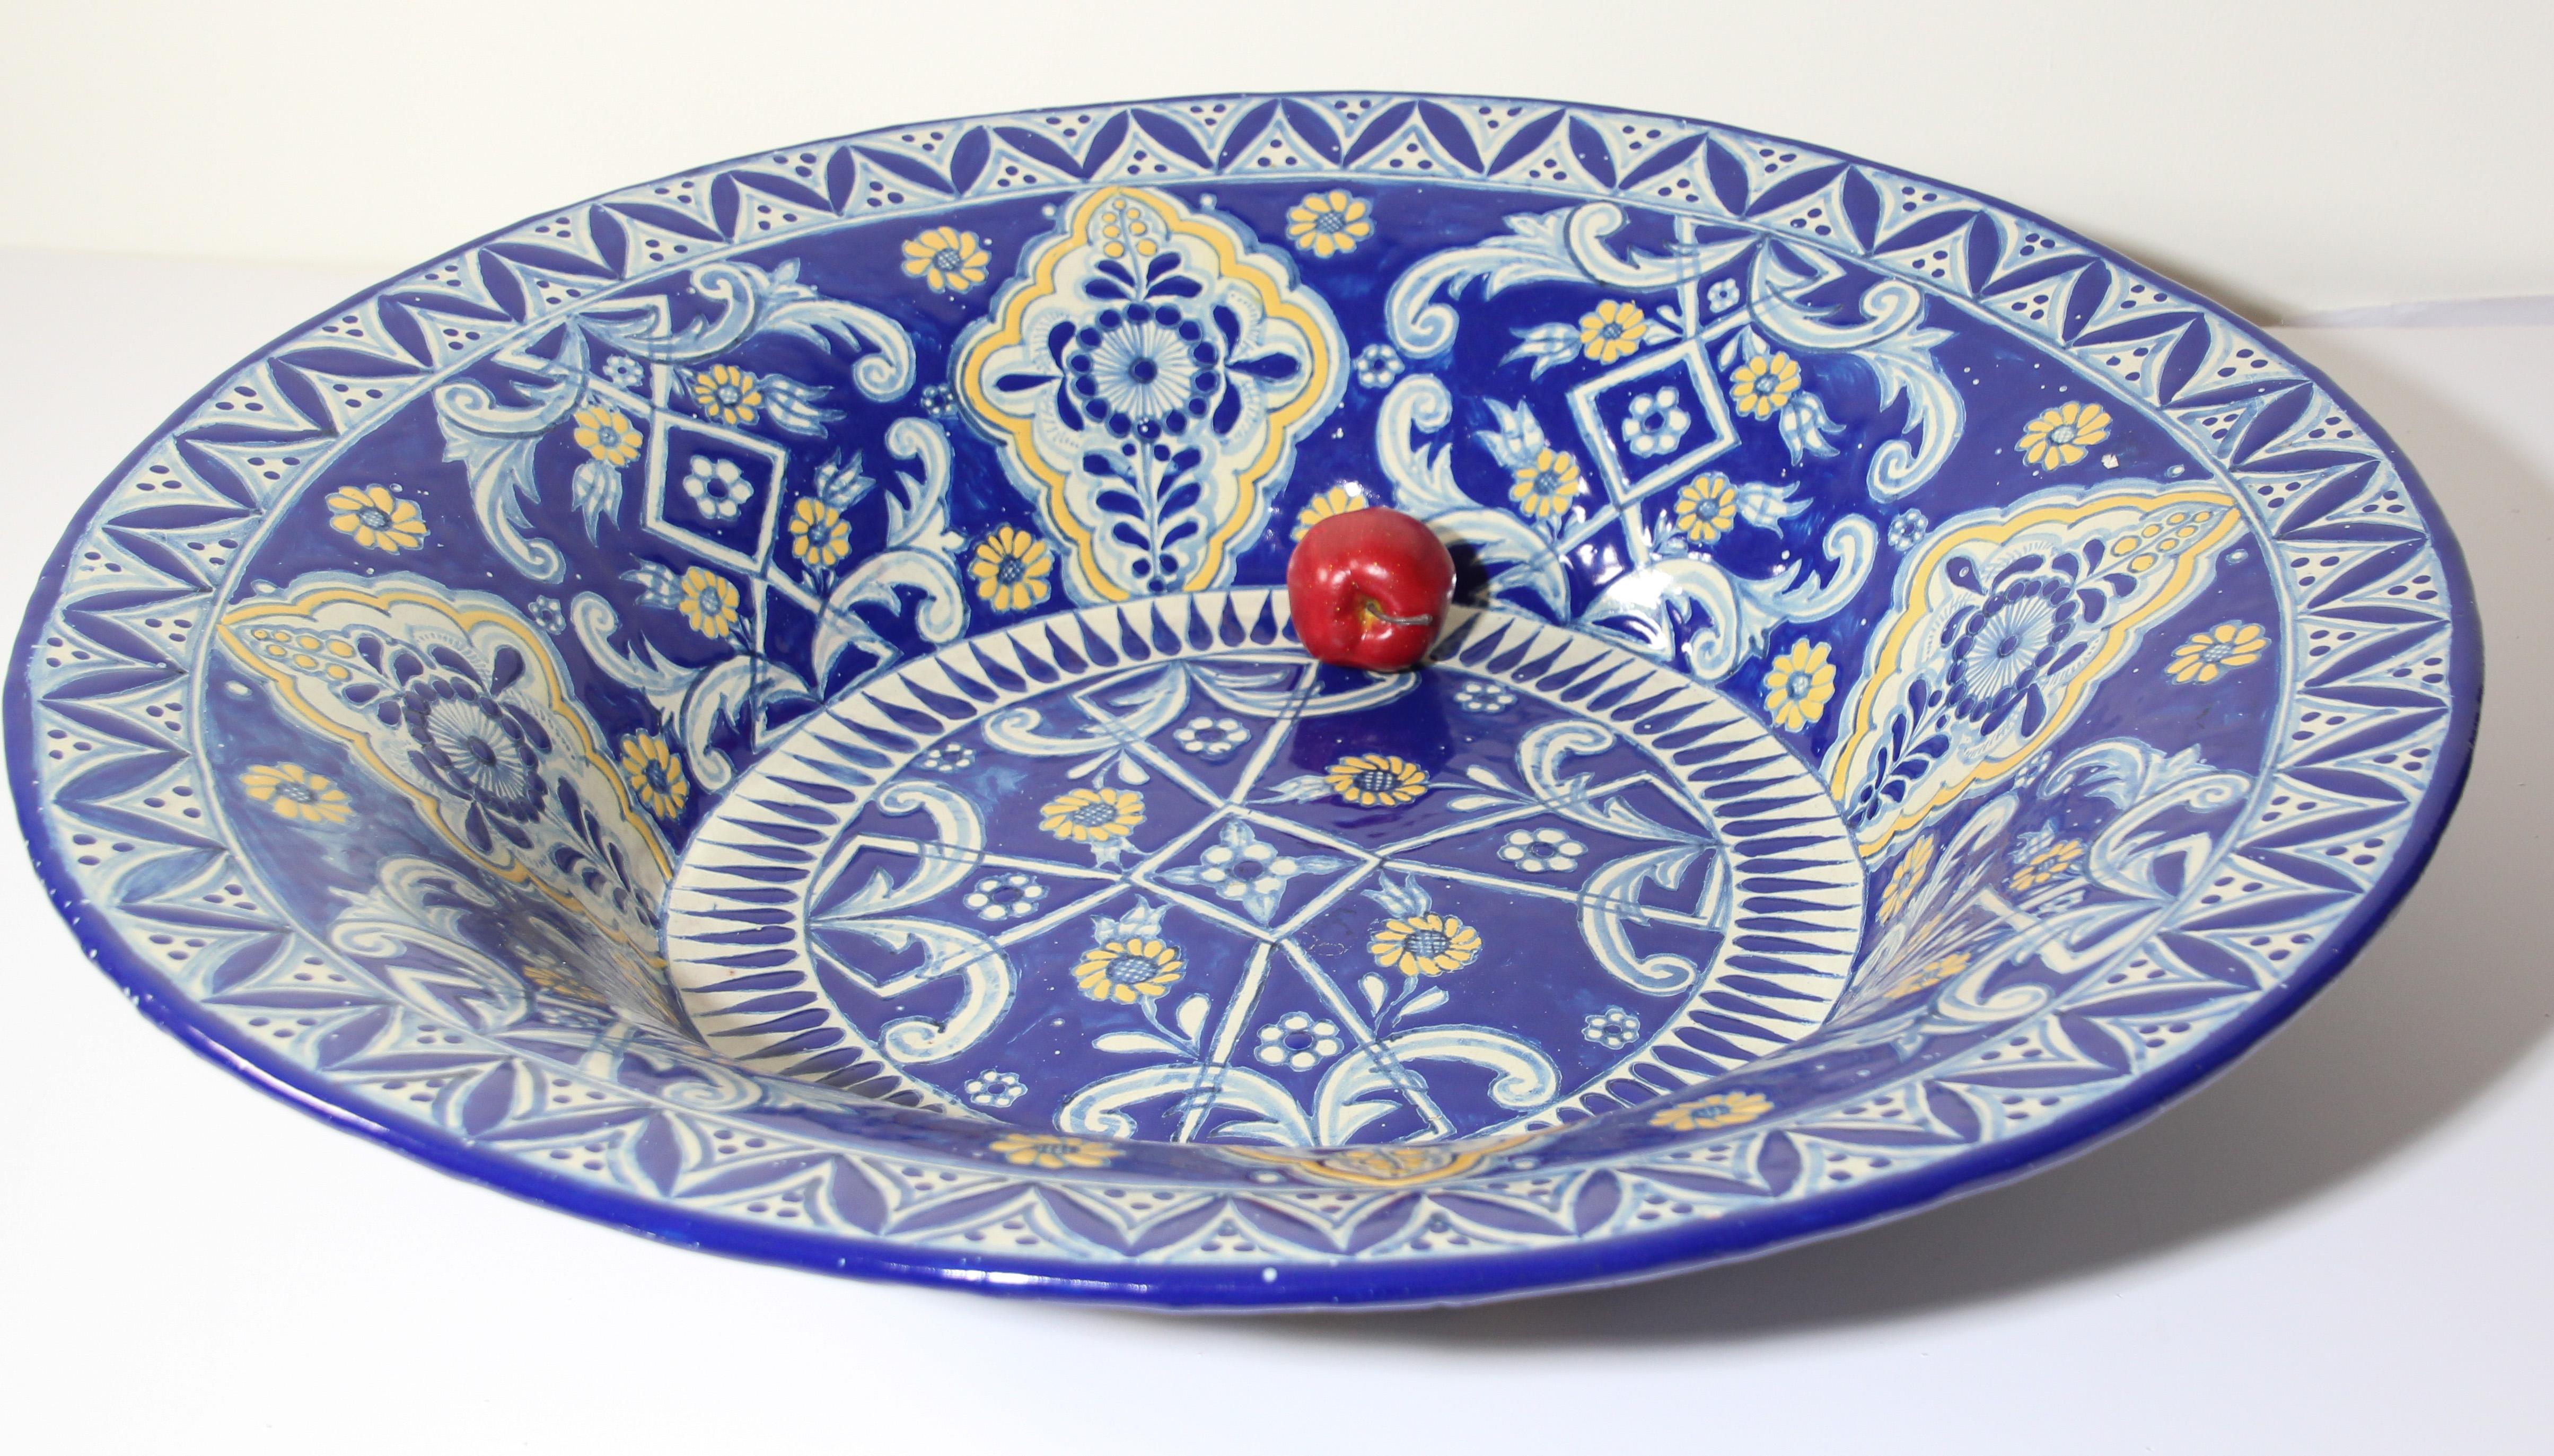 Authentic oversized very fine blue and white Mexican Talavera de la Reina glazed ceramic bowl.
Huge blue and white Mexican Talavera pottery handcrafted and hand painted with floral designs in shades of blues and yellow.
Hand-painted top and